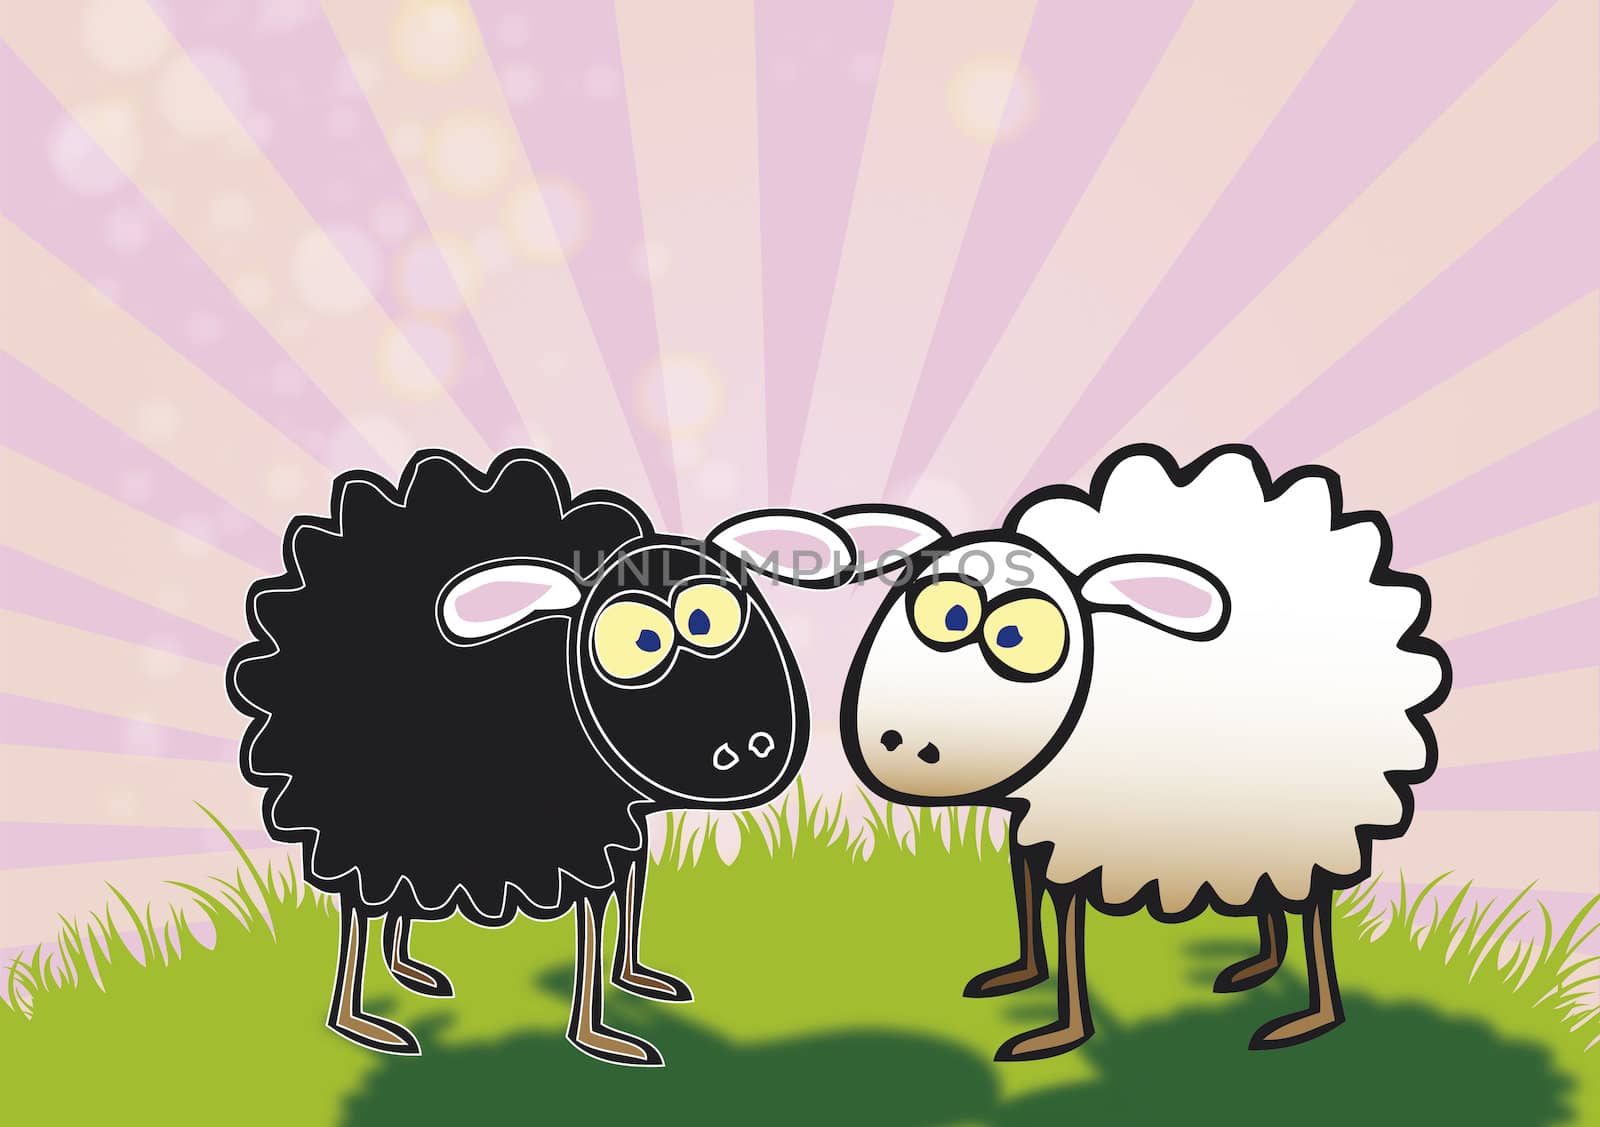 A hand drawn illustration of one black and one white coloured sheep. Both staring at each other.